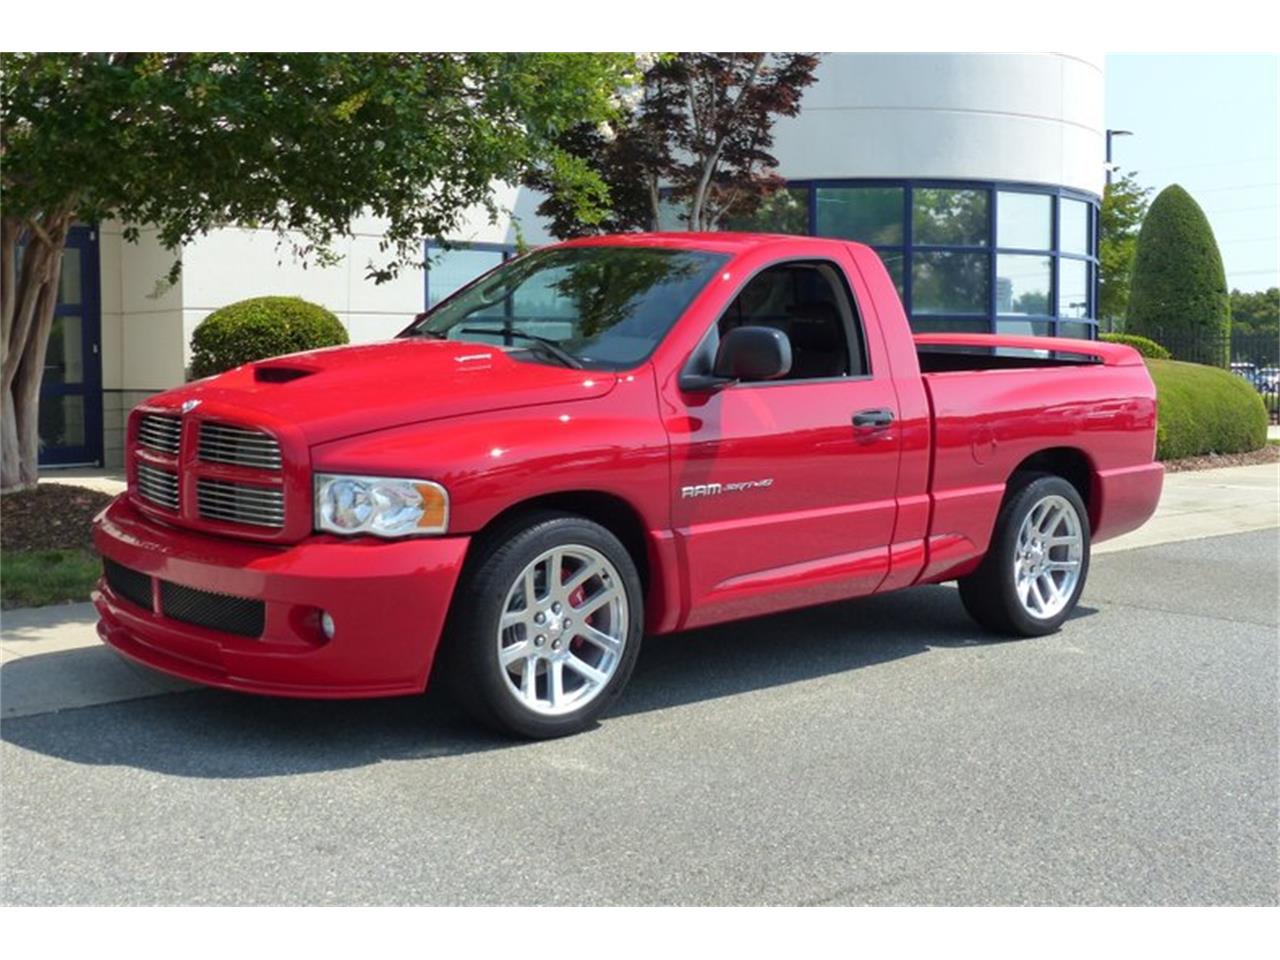 For Sale at Auction: 2005 Dodge Ram in Greensboro, North Carolina for sale in Greensboro, NC